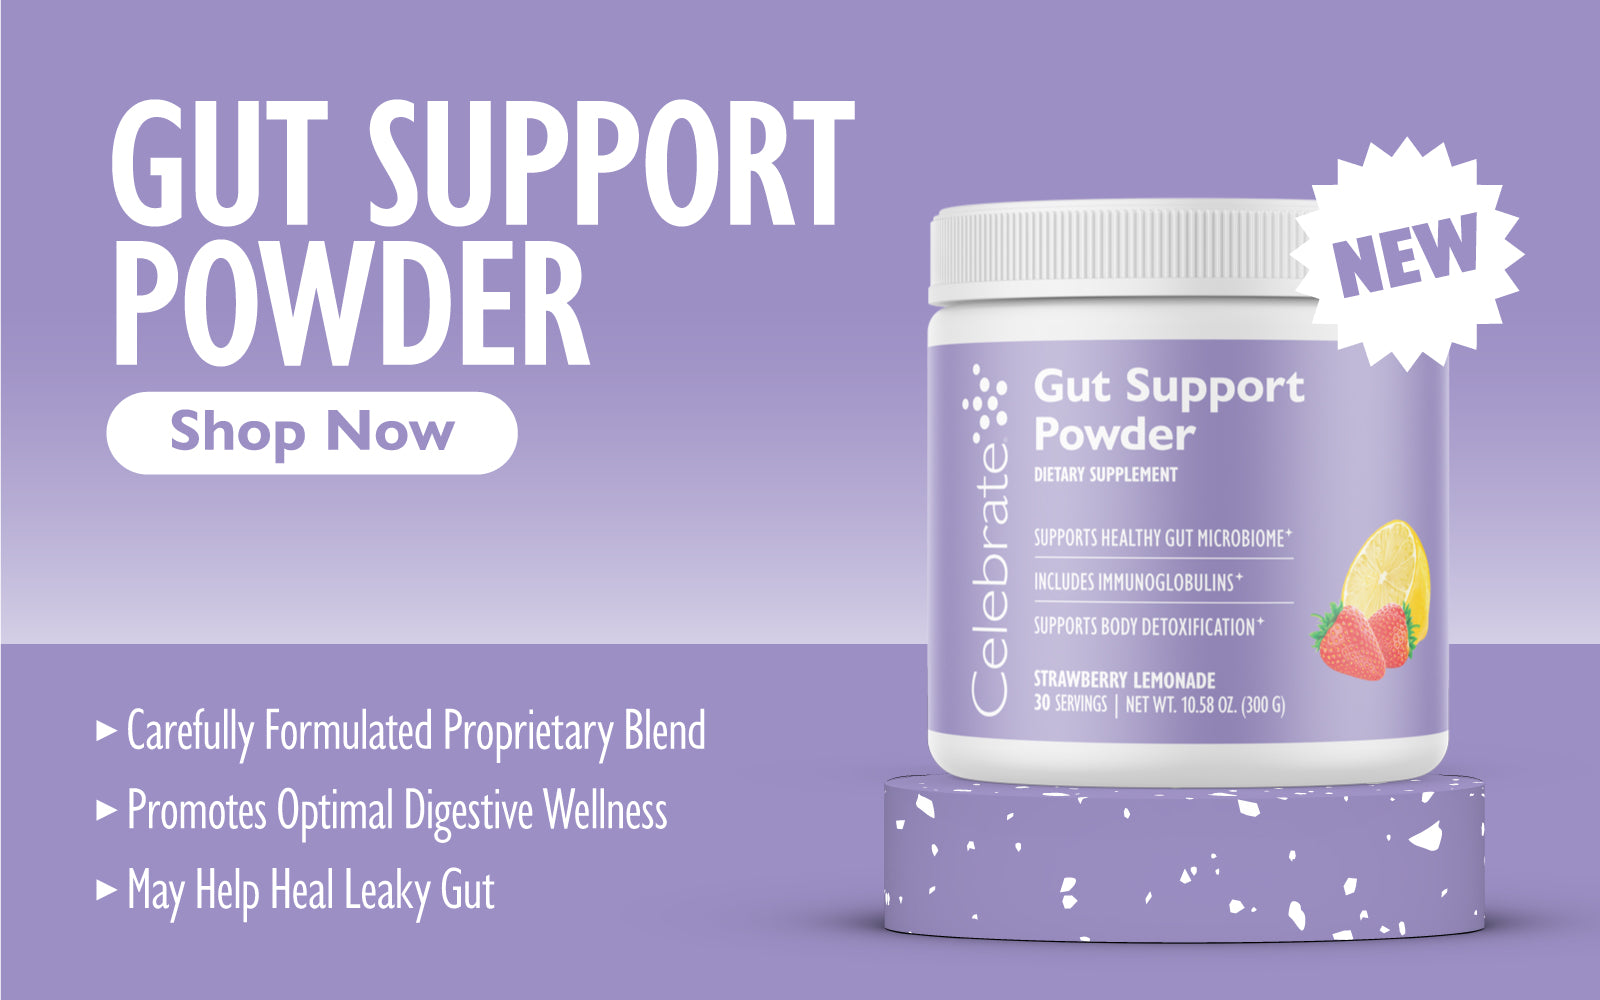 Image of new Gut support powder tub for digestive wellness